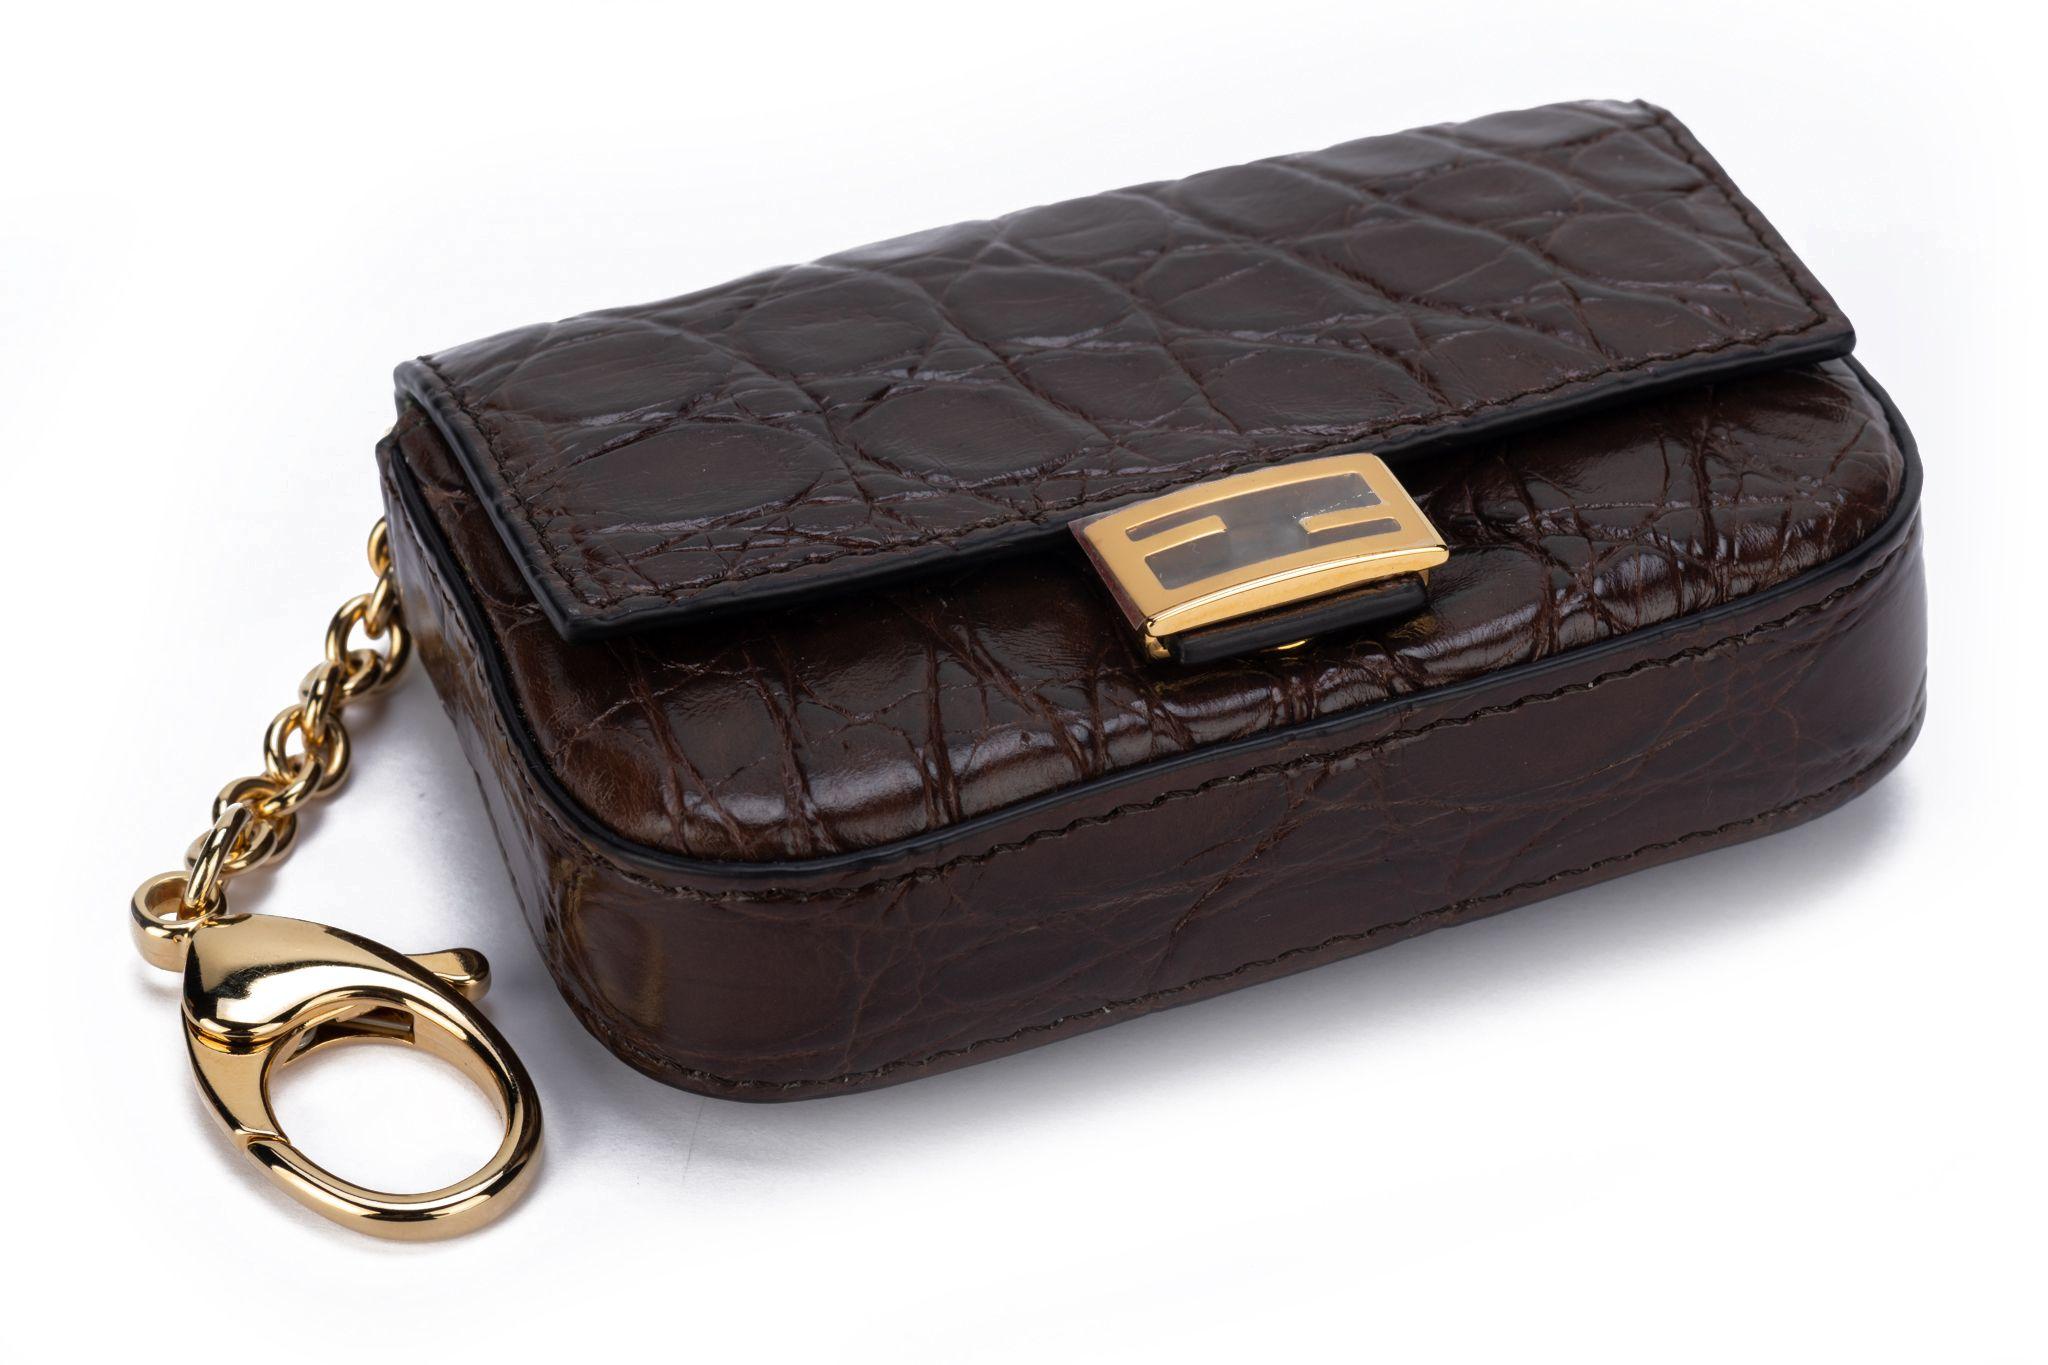 Fendi New Nano Baguette Brown Cayman In New Condition For Sale In West Hollywood, CA